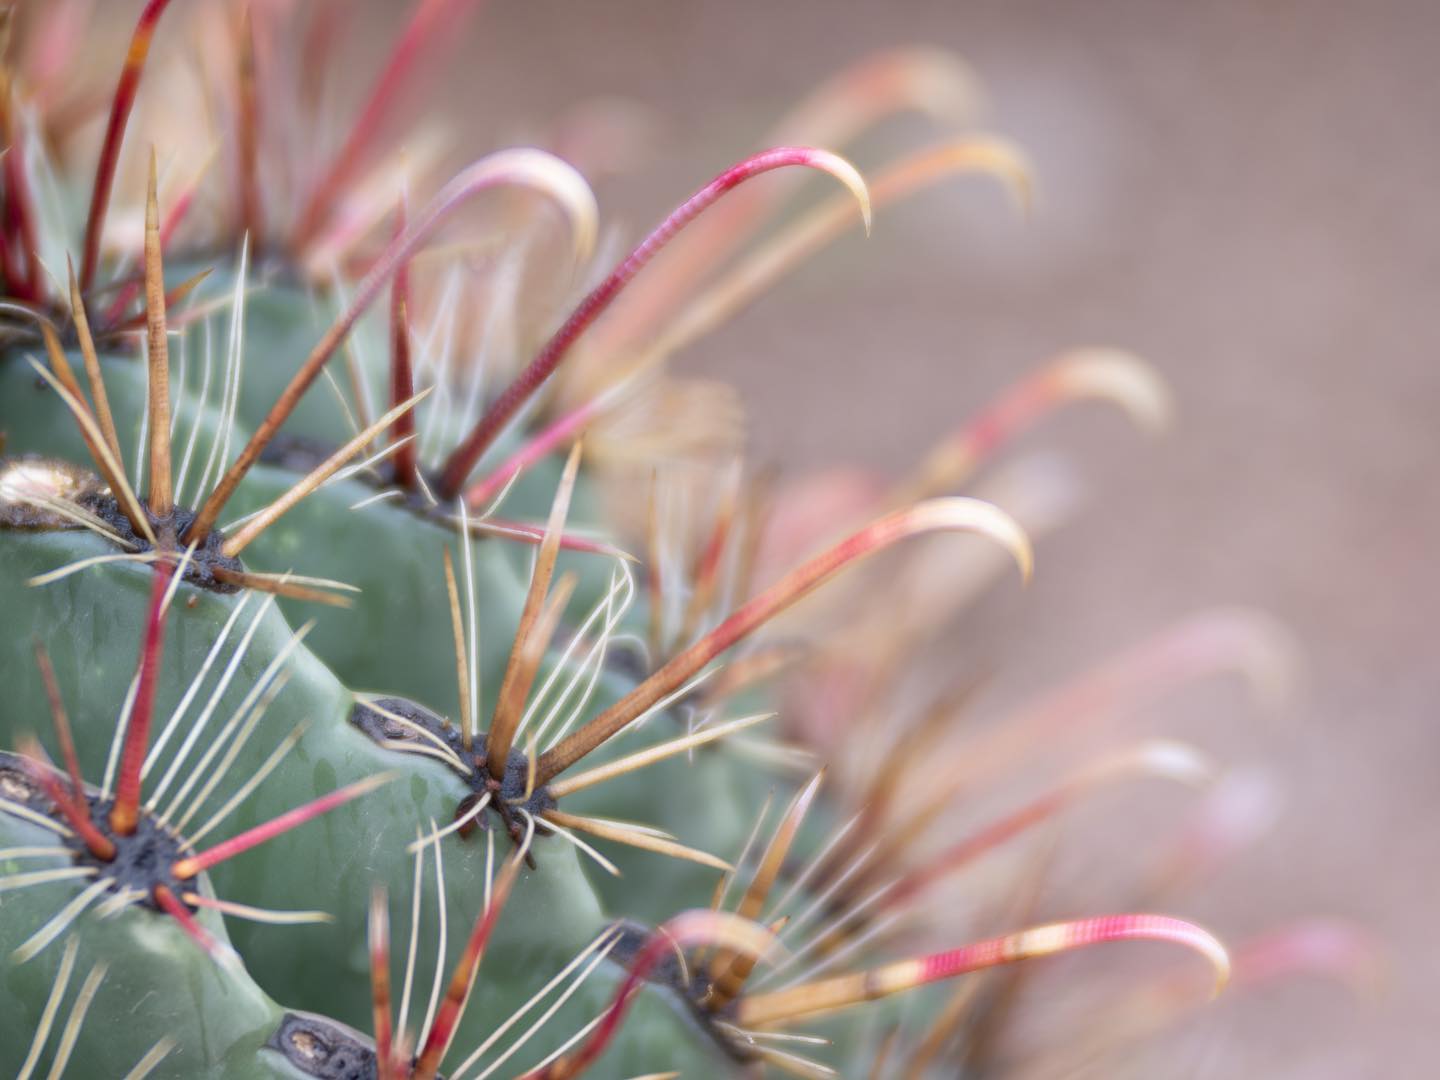 5 Poisonous Cacti to Keep Away From Children and Pets - Article onThursd